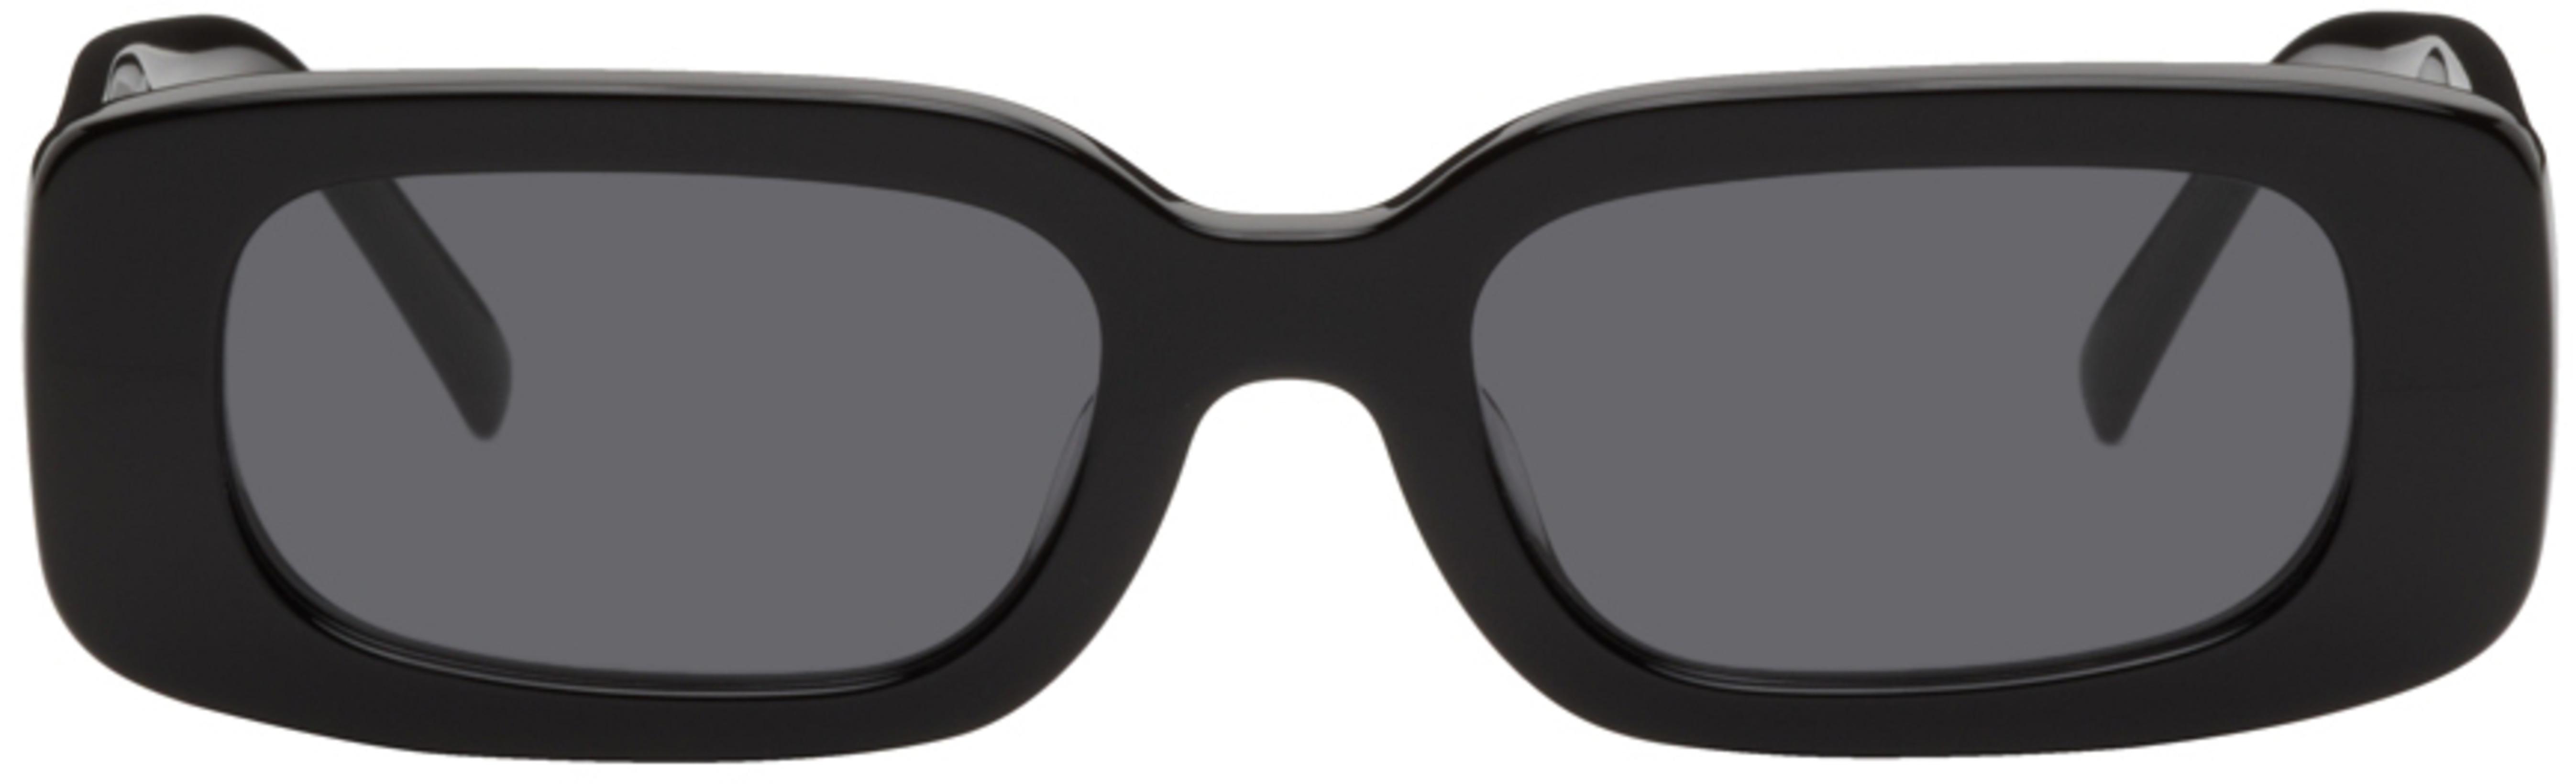 Black Show & Tell Sunglasses by BONNIE CLYDE